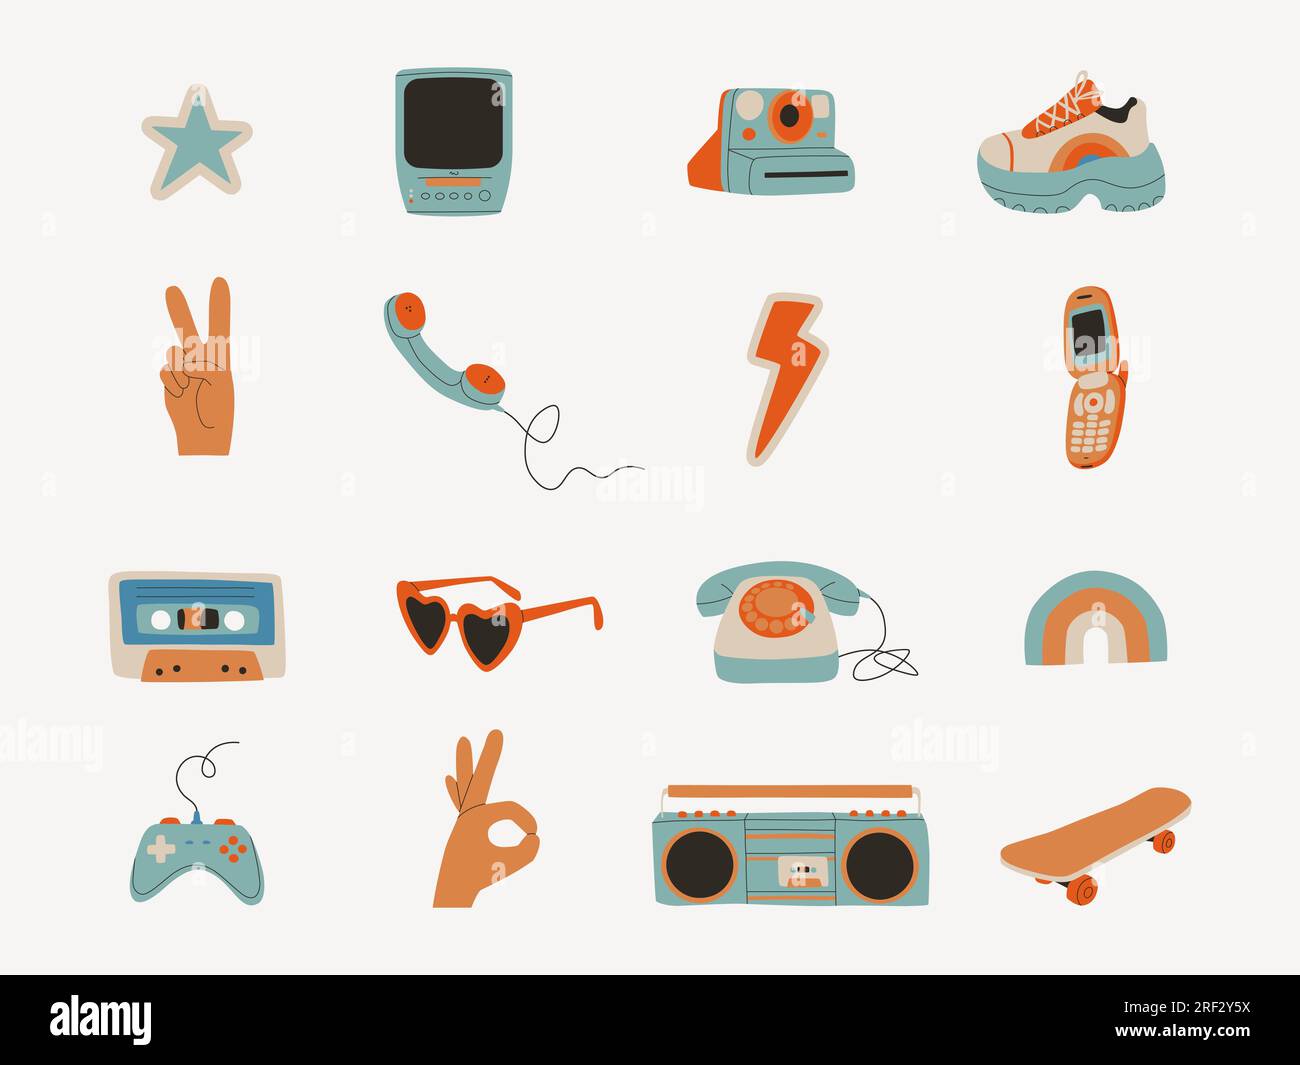 Set of retro elements from the 80s and 90s. Audio cassette, tape recorder, mobile phone, skateboard, joystick, handset phone. Vector flat trend Stock Vector